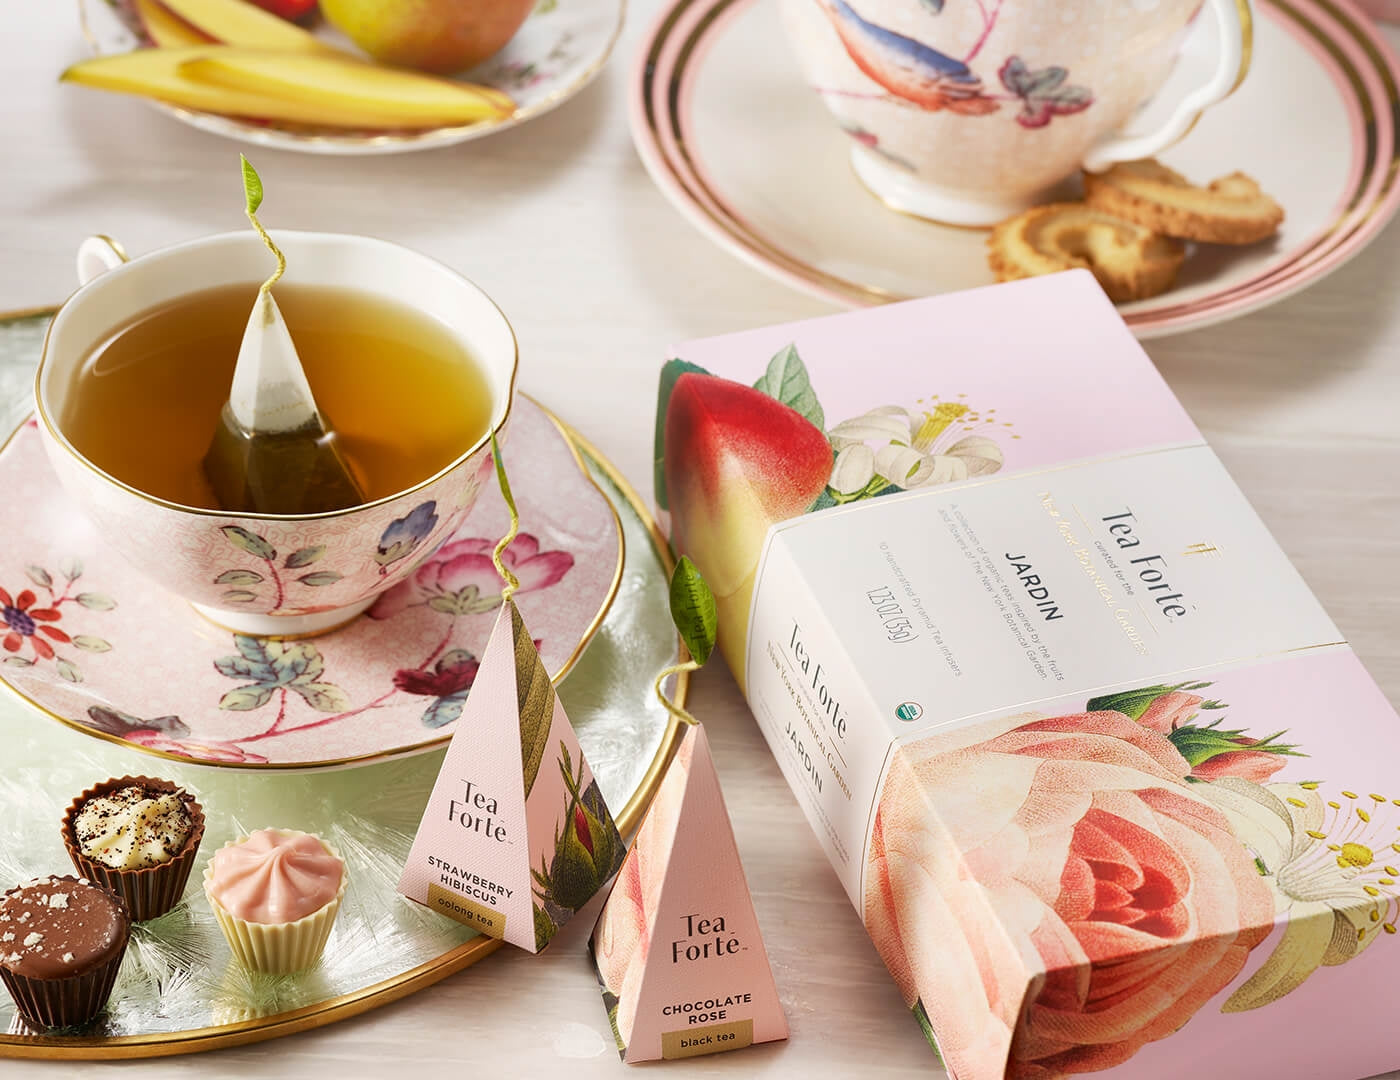 Jardin Petite Presentation Box on a table with a fancy pink teacup and saucer and mini desserts